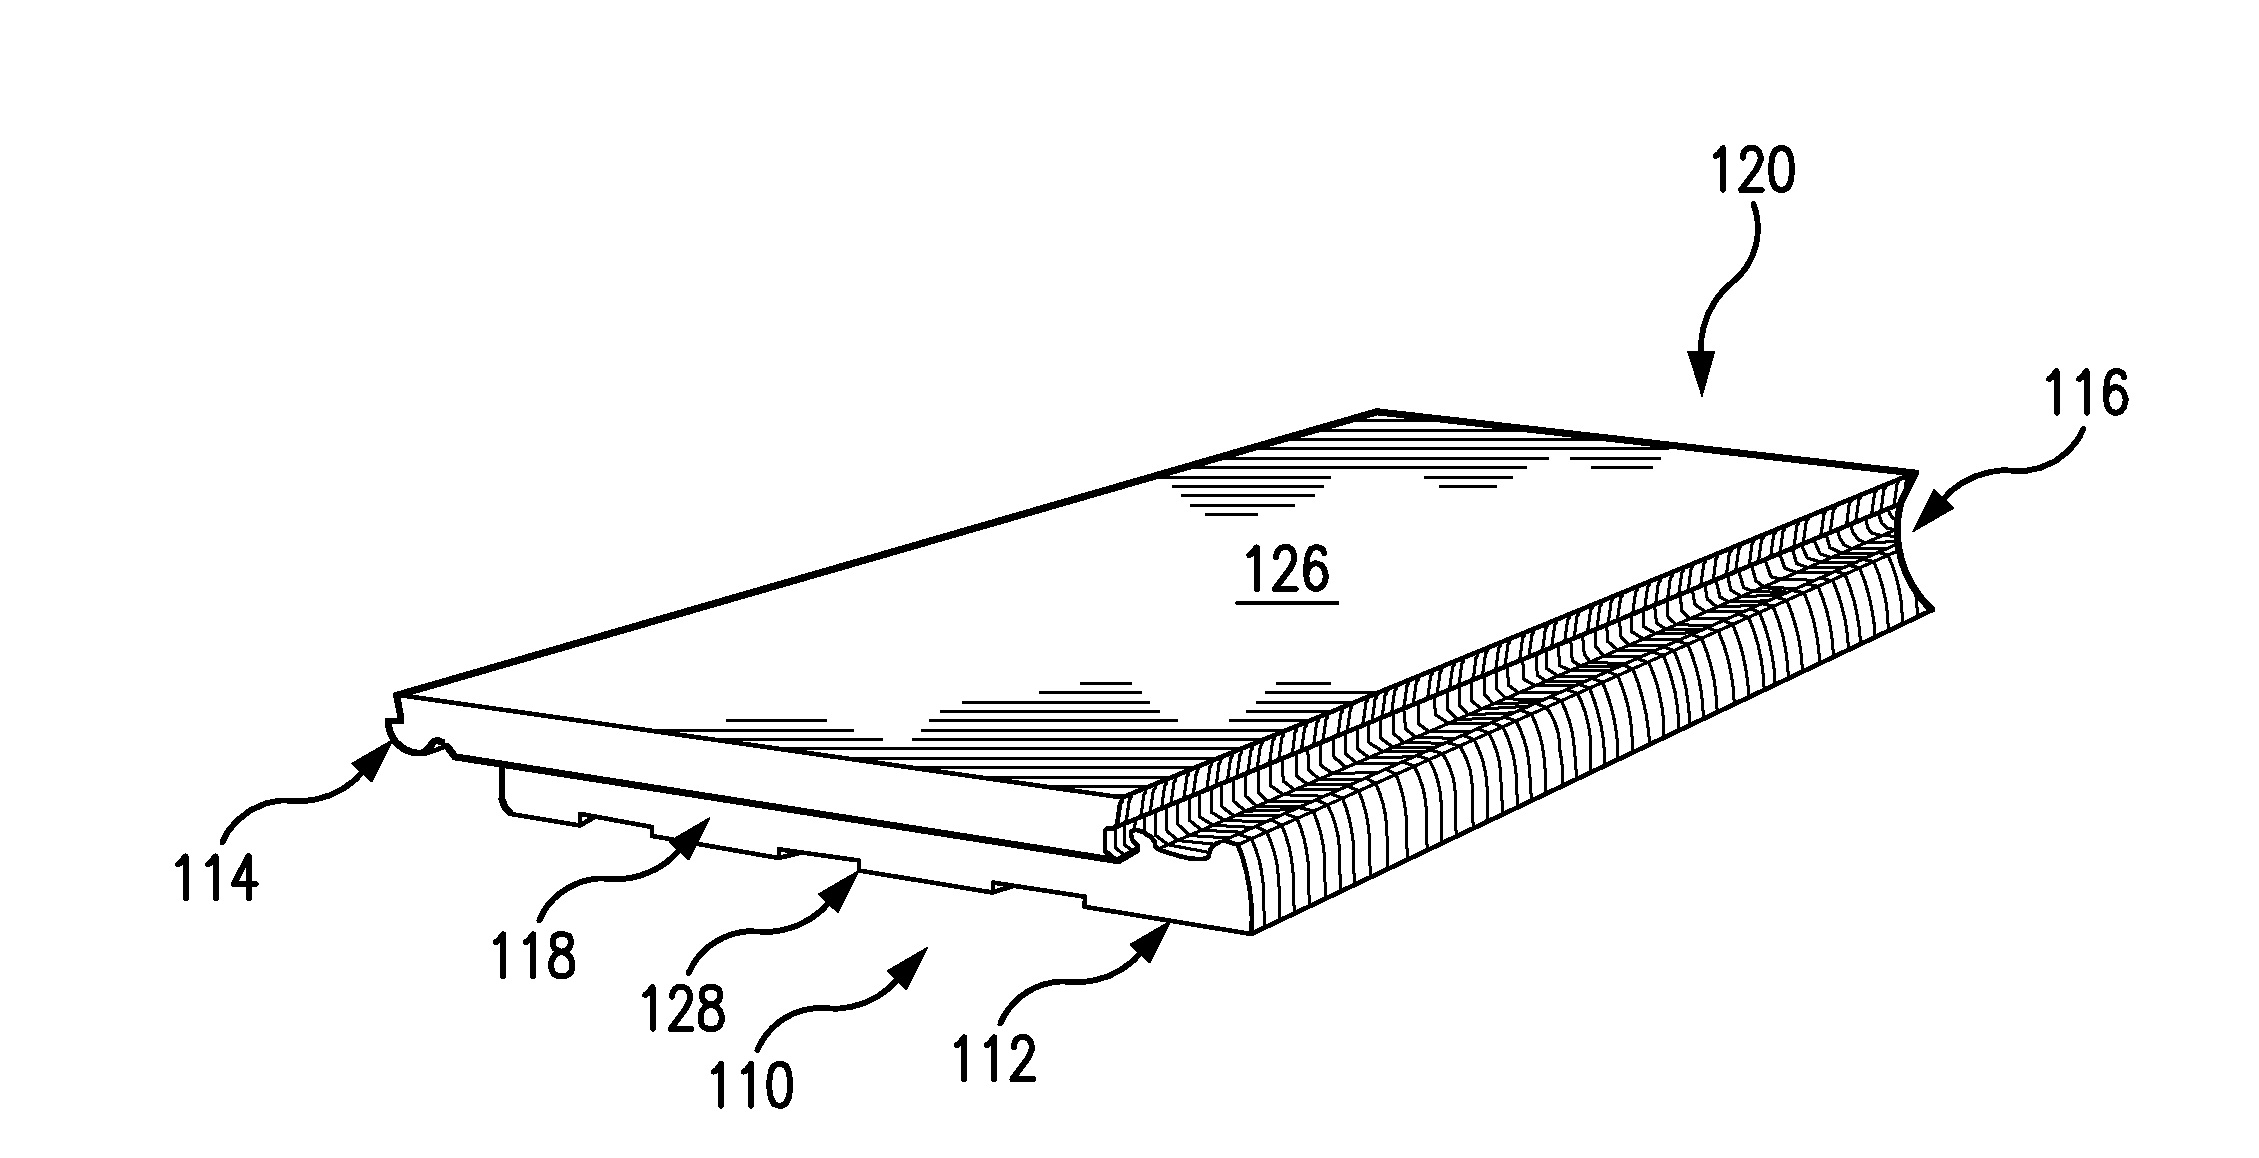 Non-squeaking wood flooring systems and methods